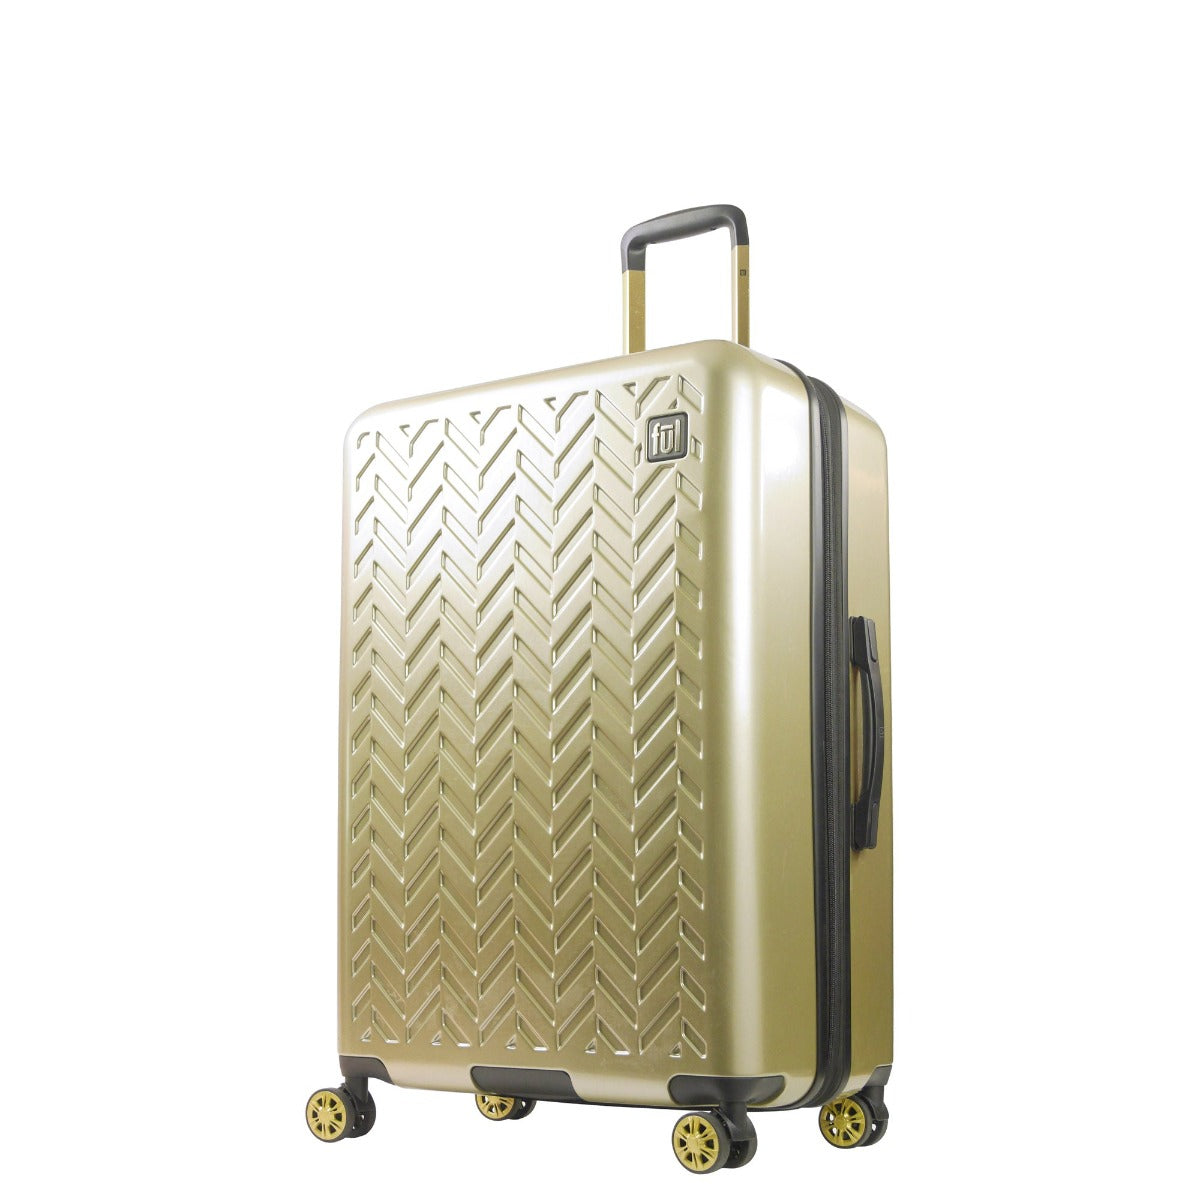 Ful Groove 31 inch hardside spinner suitcase gold checked luggage black details